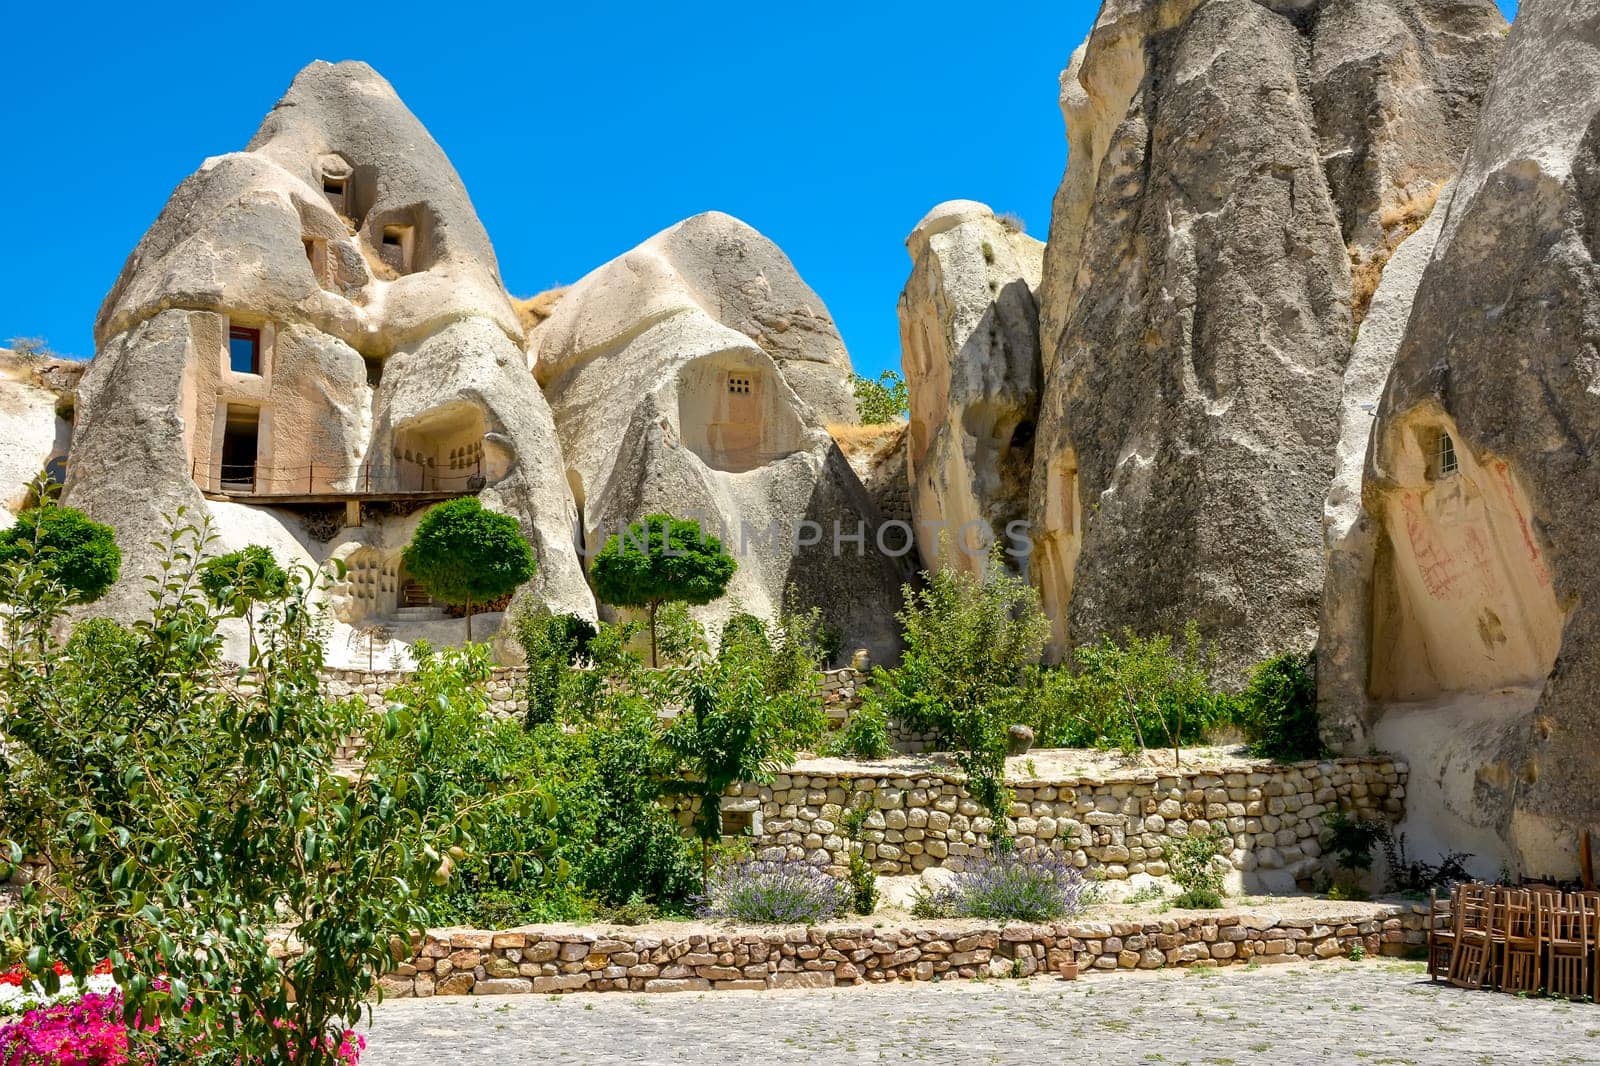 Houses built on the typical rocks of the Cappadocia region in Turkey